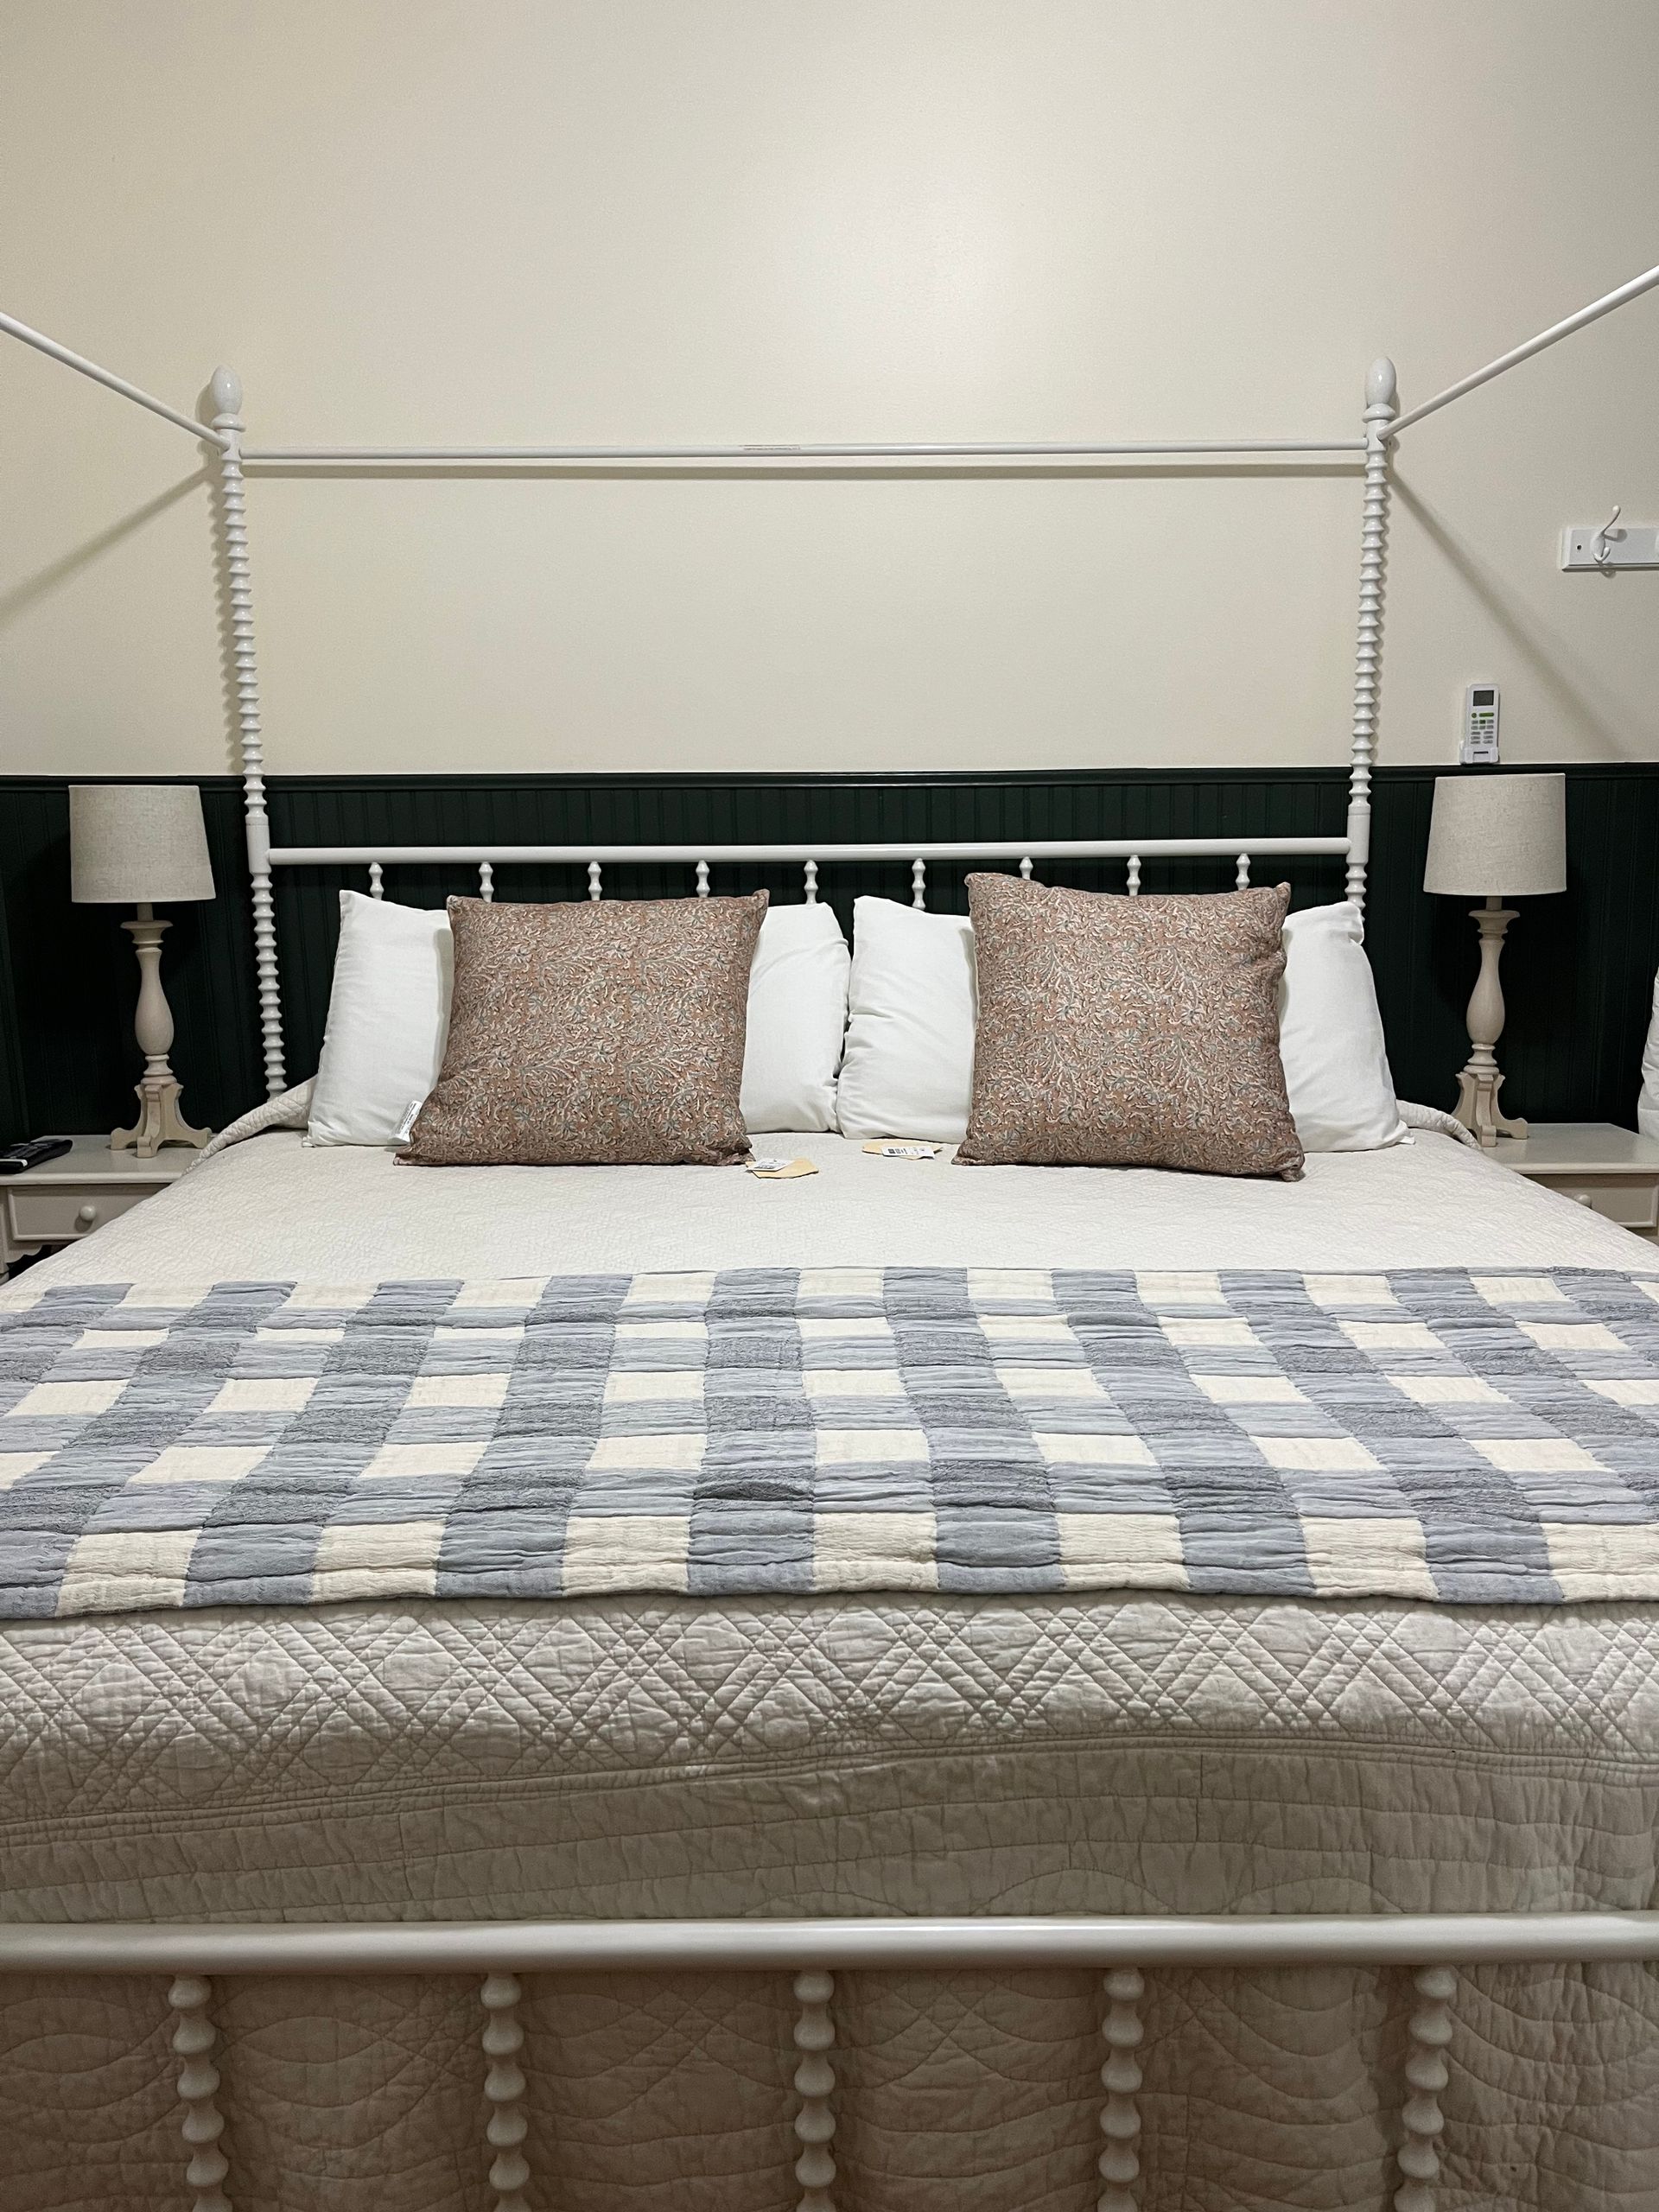 A bed with a checkered blanket and pillows in a bedroom.